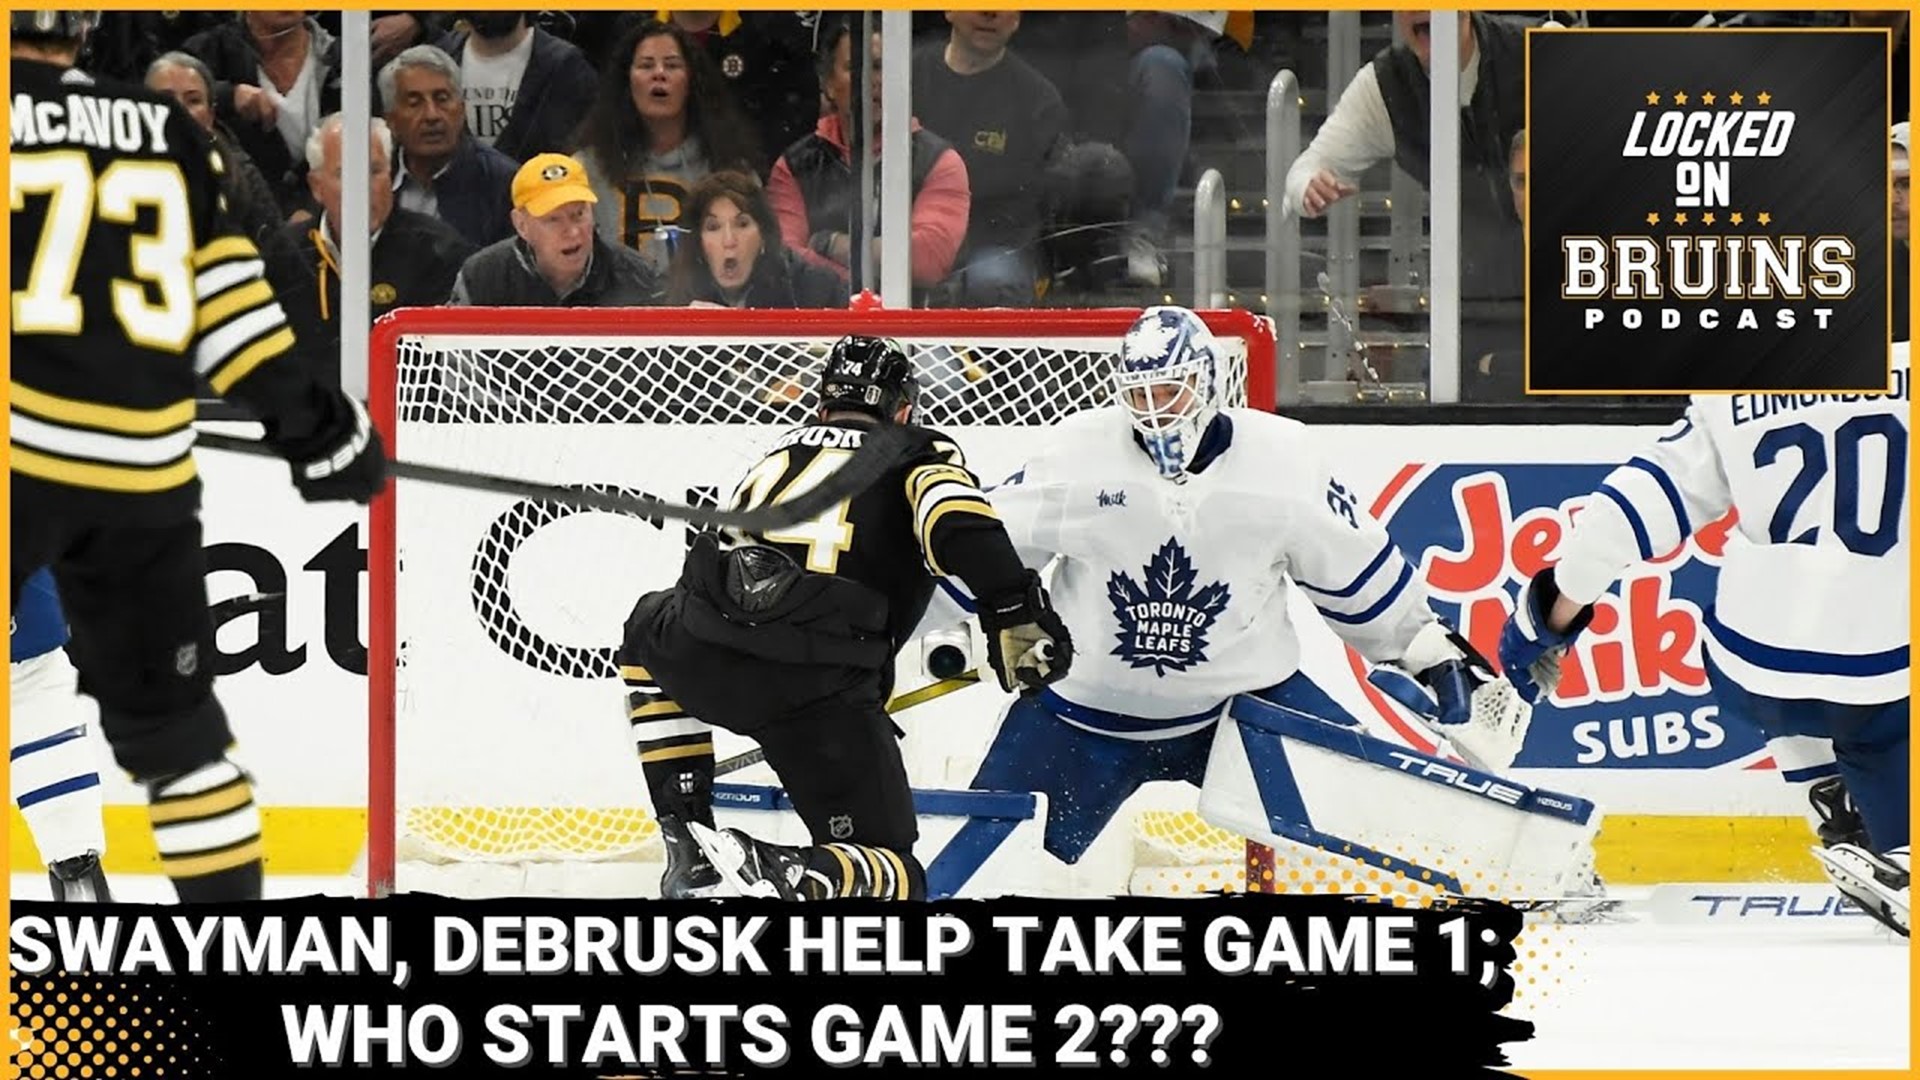 Bruins Win Game 1 vs. Leafs Thanks to Swayman, Secondary Scoring; Who Starts Game 2?